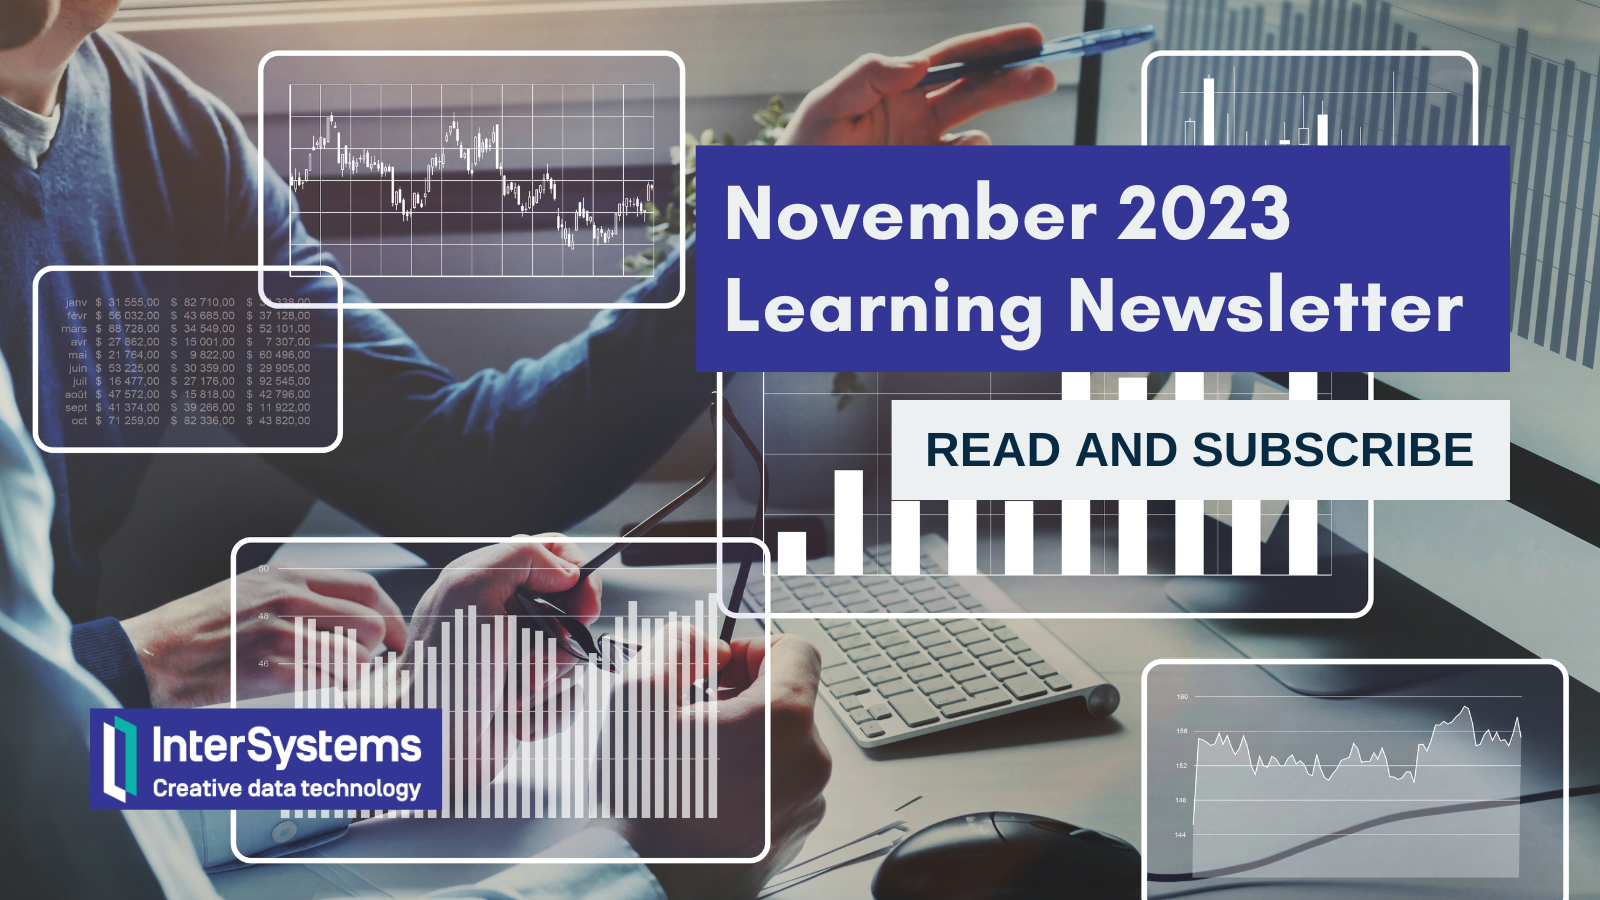 November 2023 Learning Newsletter: Read and Subscribe